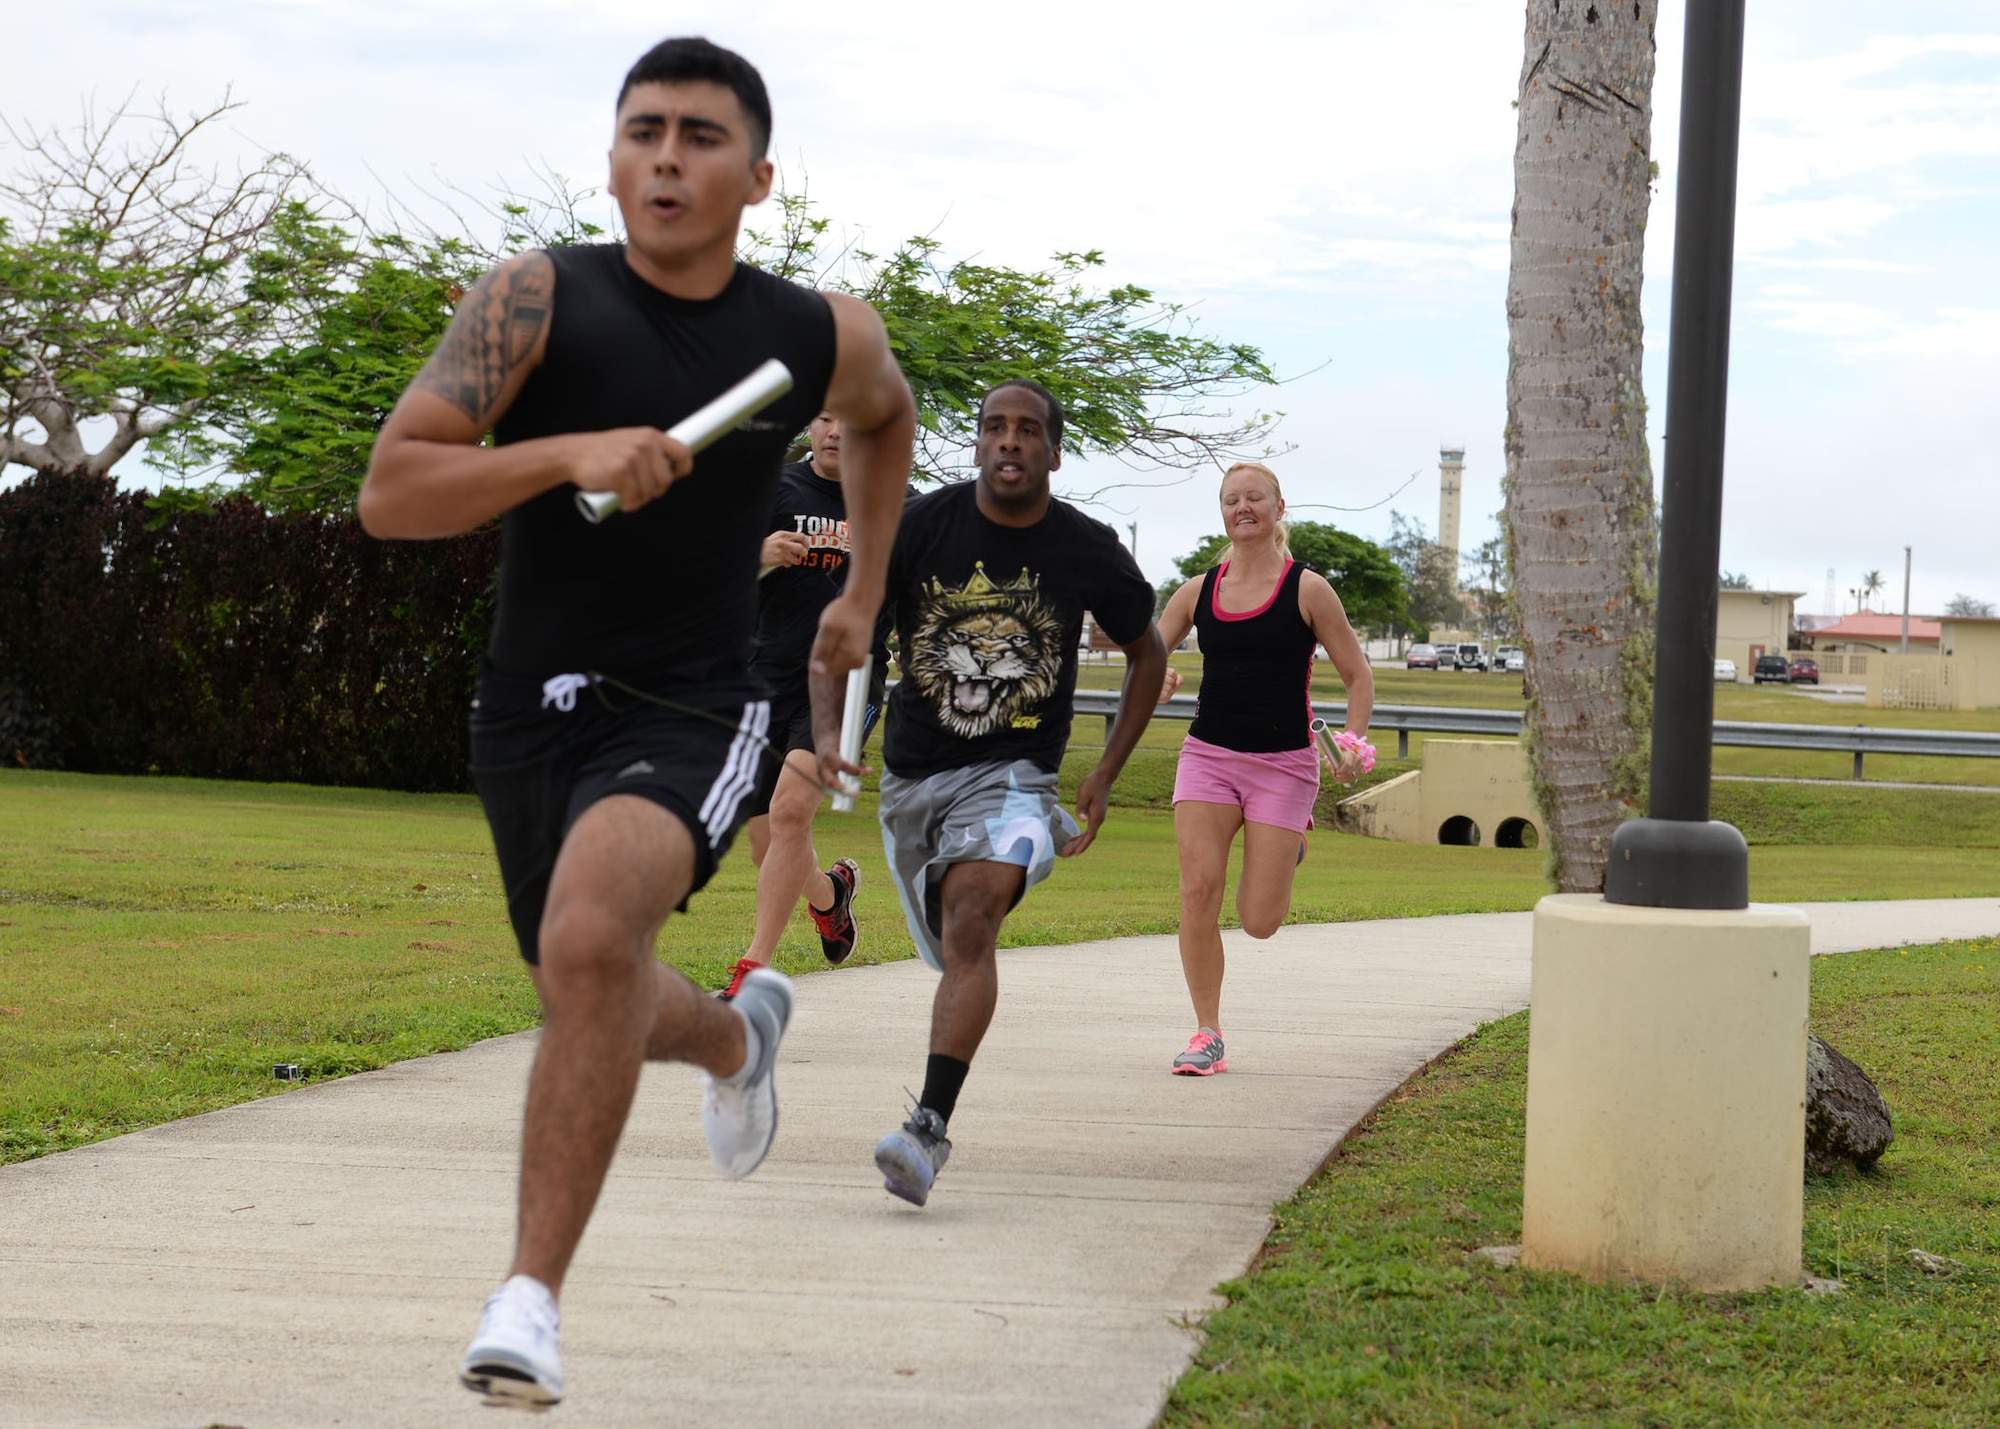 Racers sprint during a baton relay race May 8, 2015, at Arc Light Park, Andersen Air Force Base, Guam. The race was part of the Gladiator Glide, a base-wide morale event held by the Coral Reef Fitness Center, that consisted of several competitions including a baton relay, sack race, wheelbarrow race and a pie eating contest. (U.S. Air Force photo by Airman 1st Class Joshua Smoot/Released)